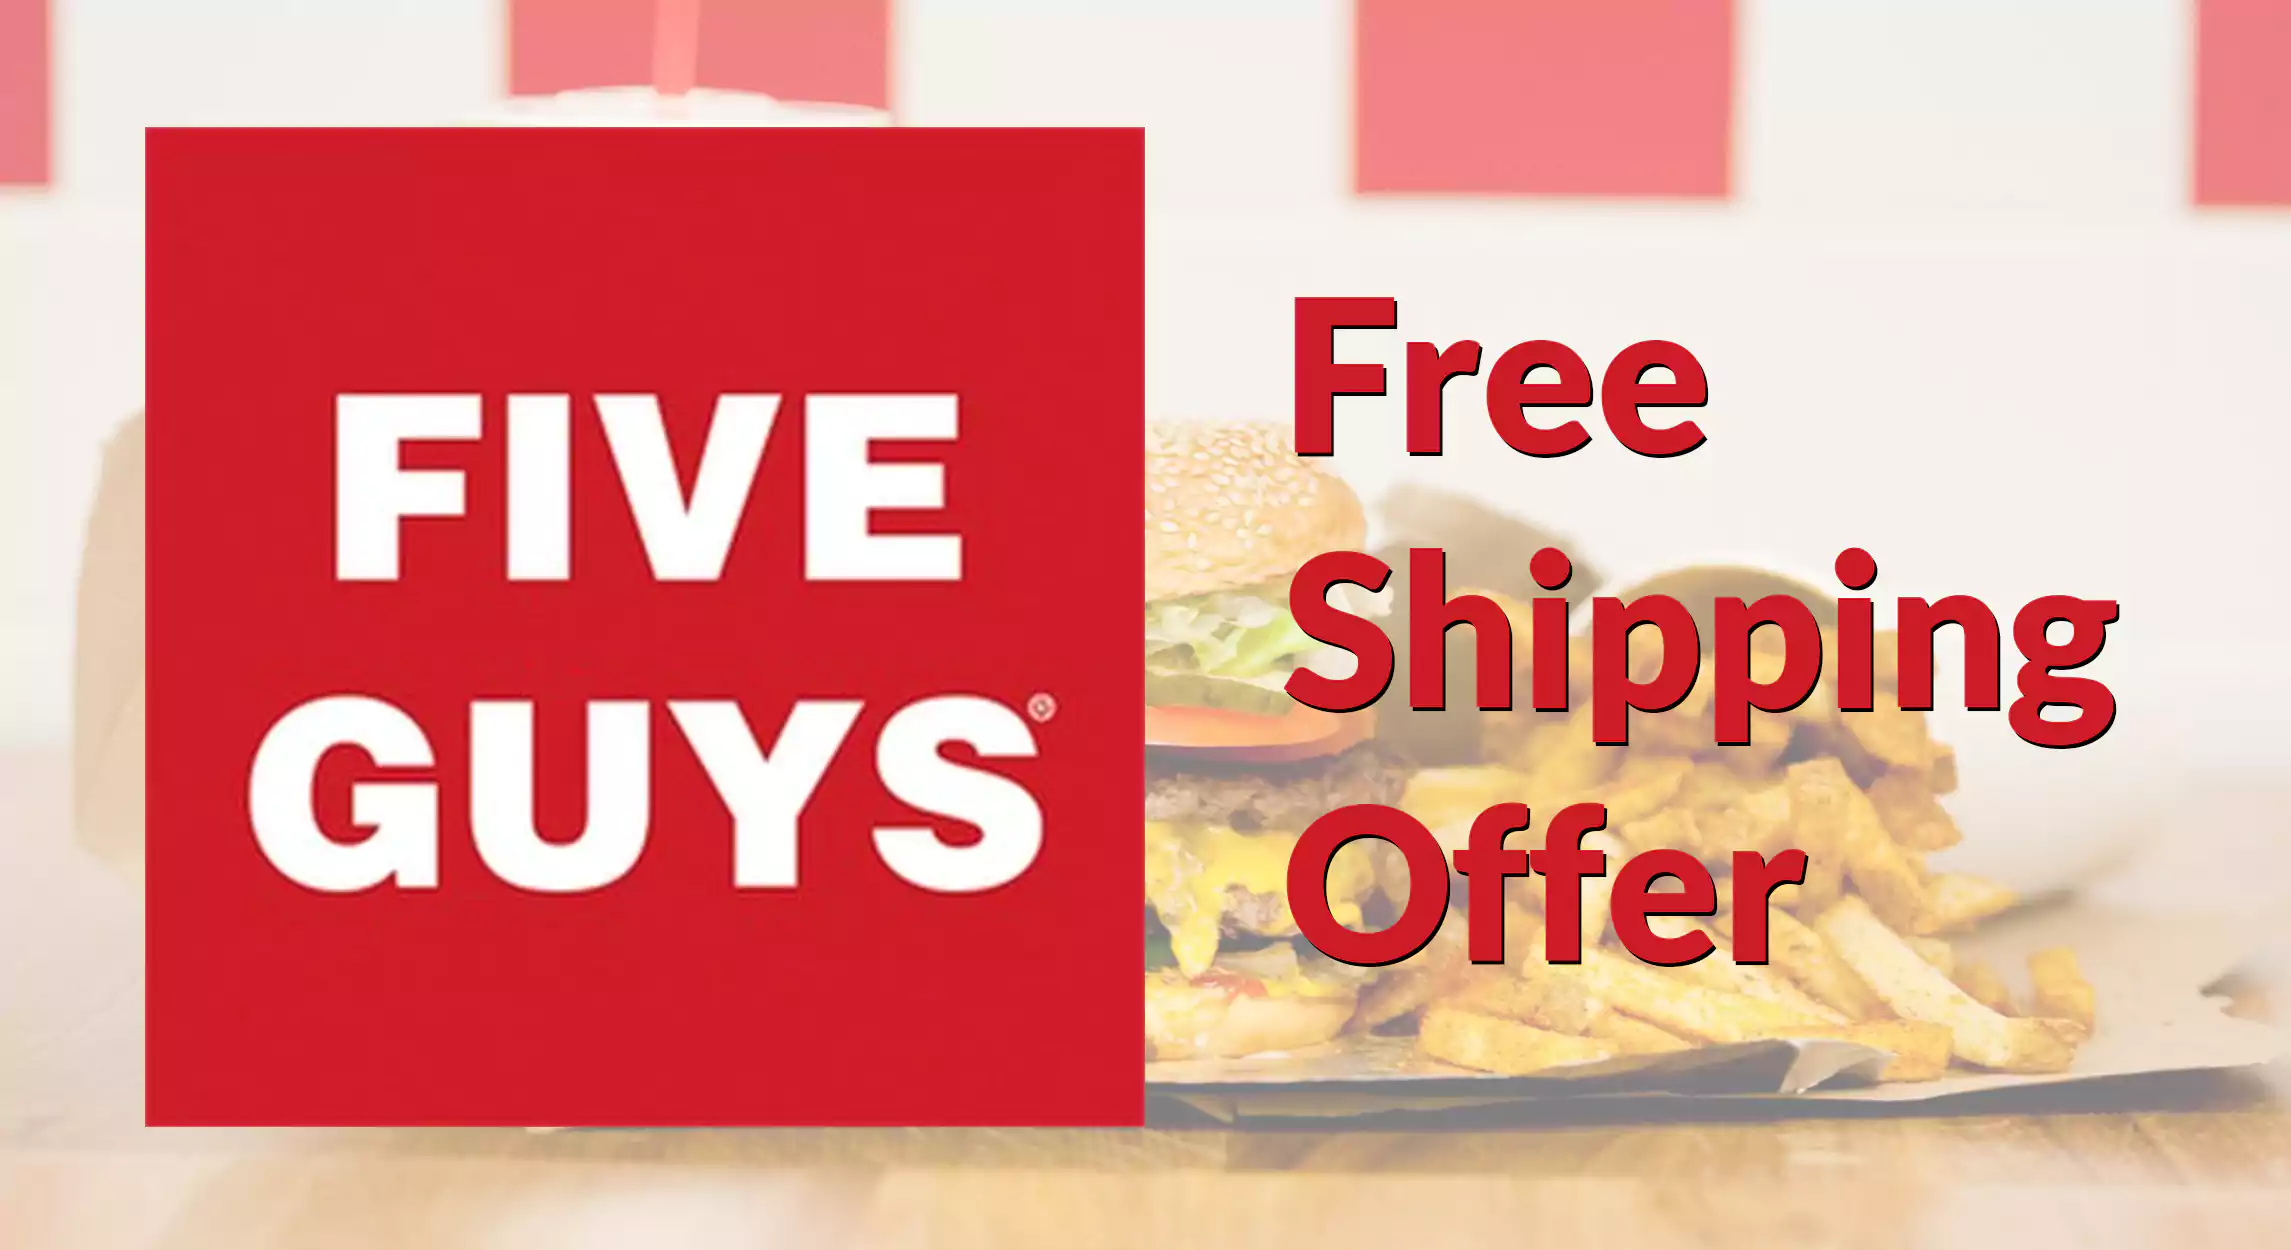 Five Guys Free Shipping Offer